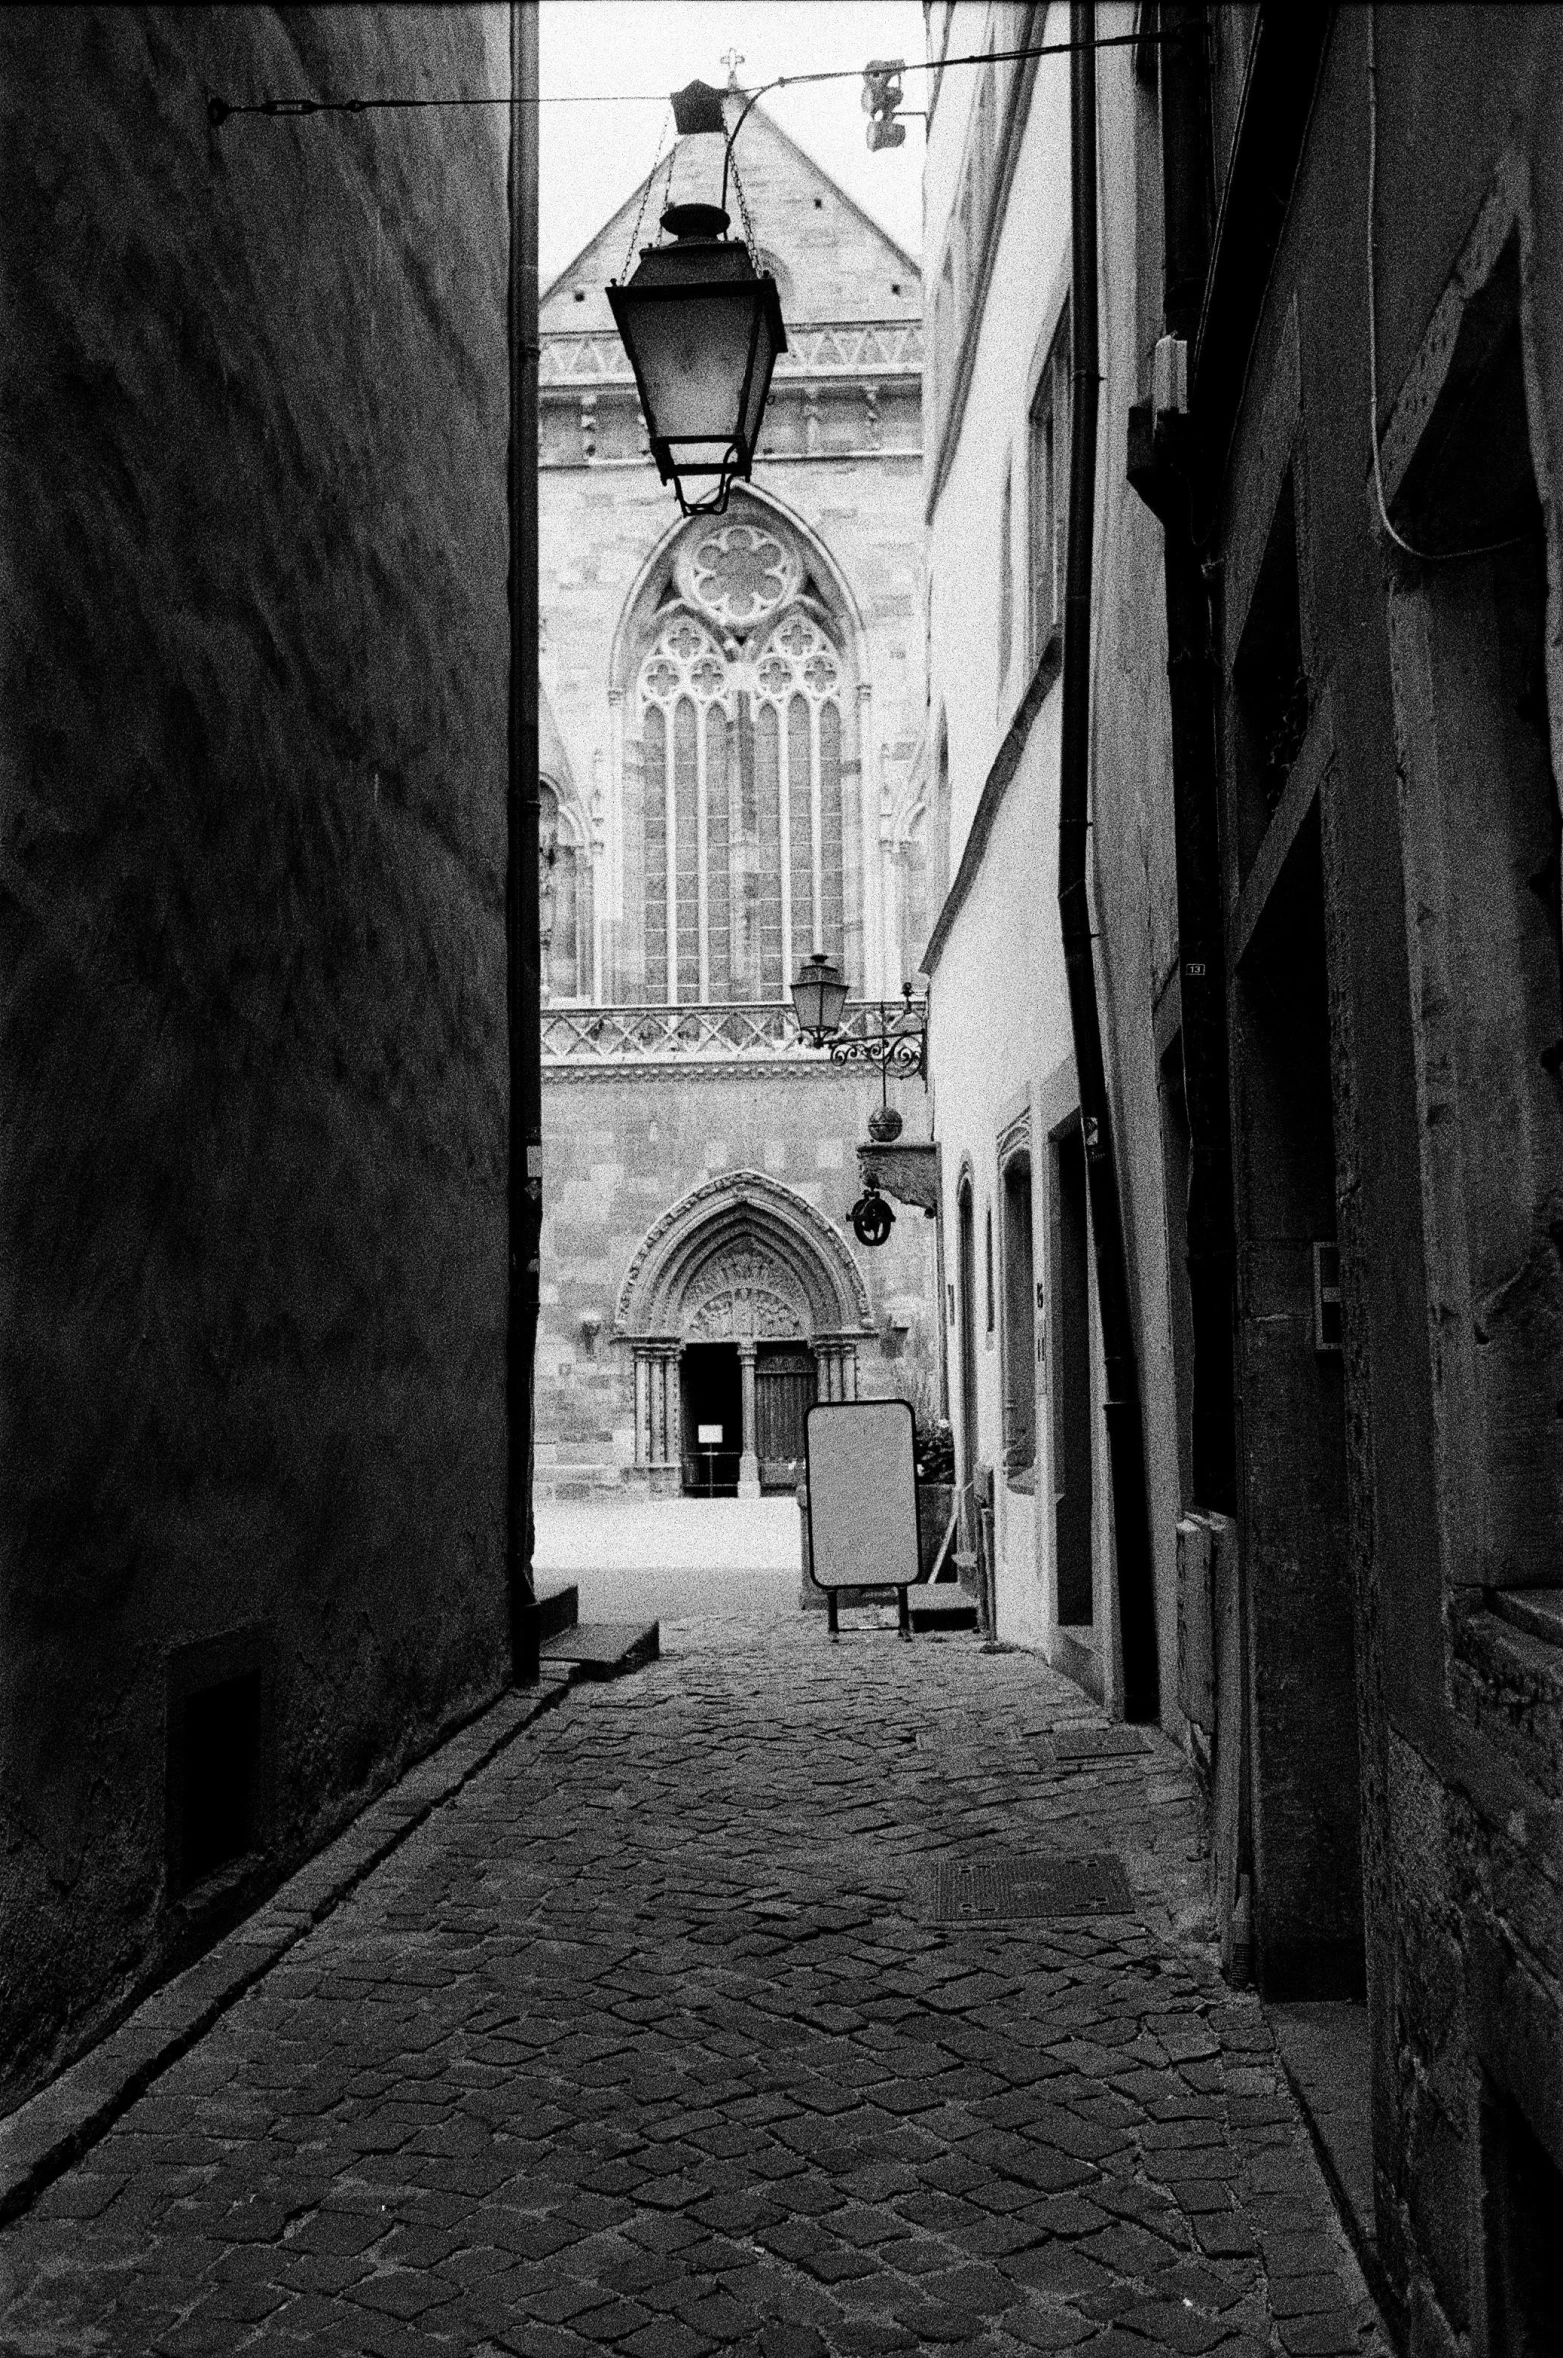 an old narrow alley with a light post and a clock tower